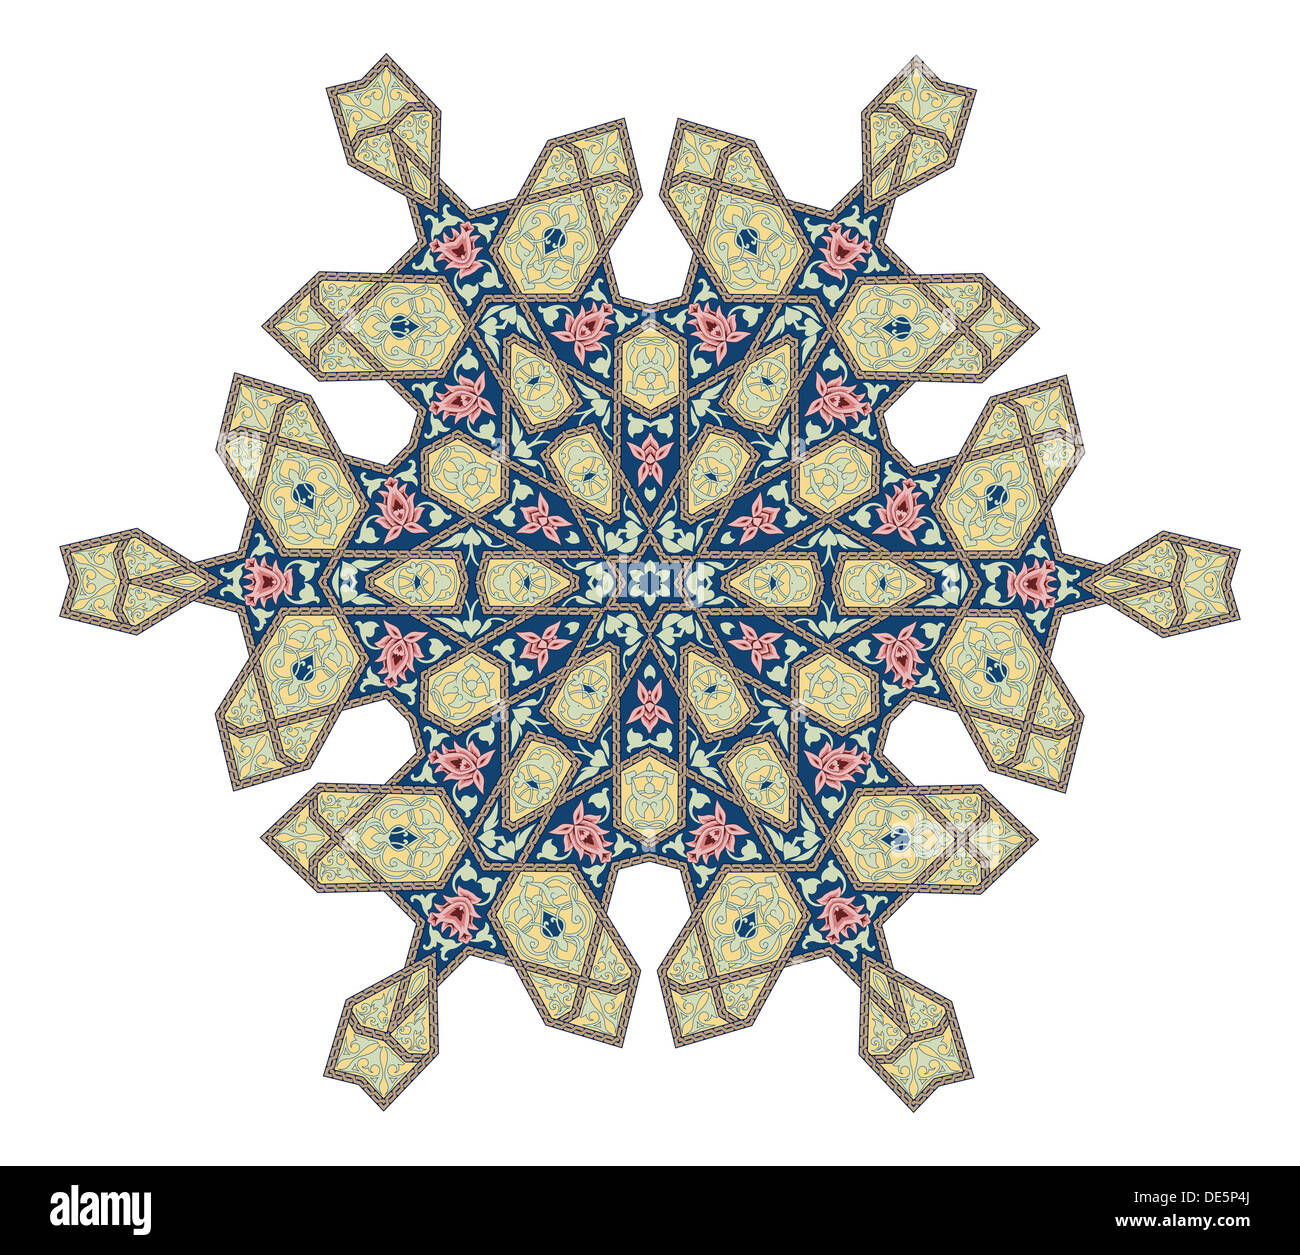 Arabic middle eastern floral pattern motif, based on Ottoman ornament Stock Photo